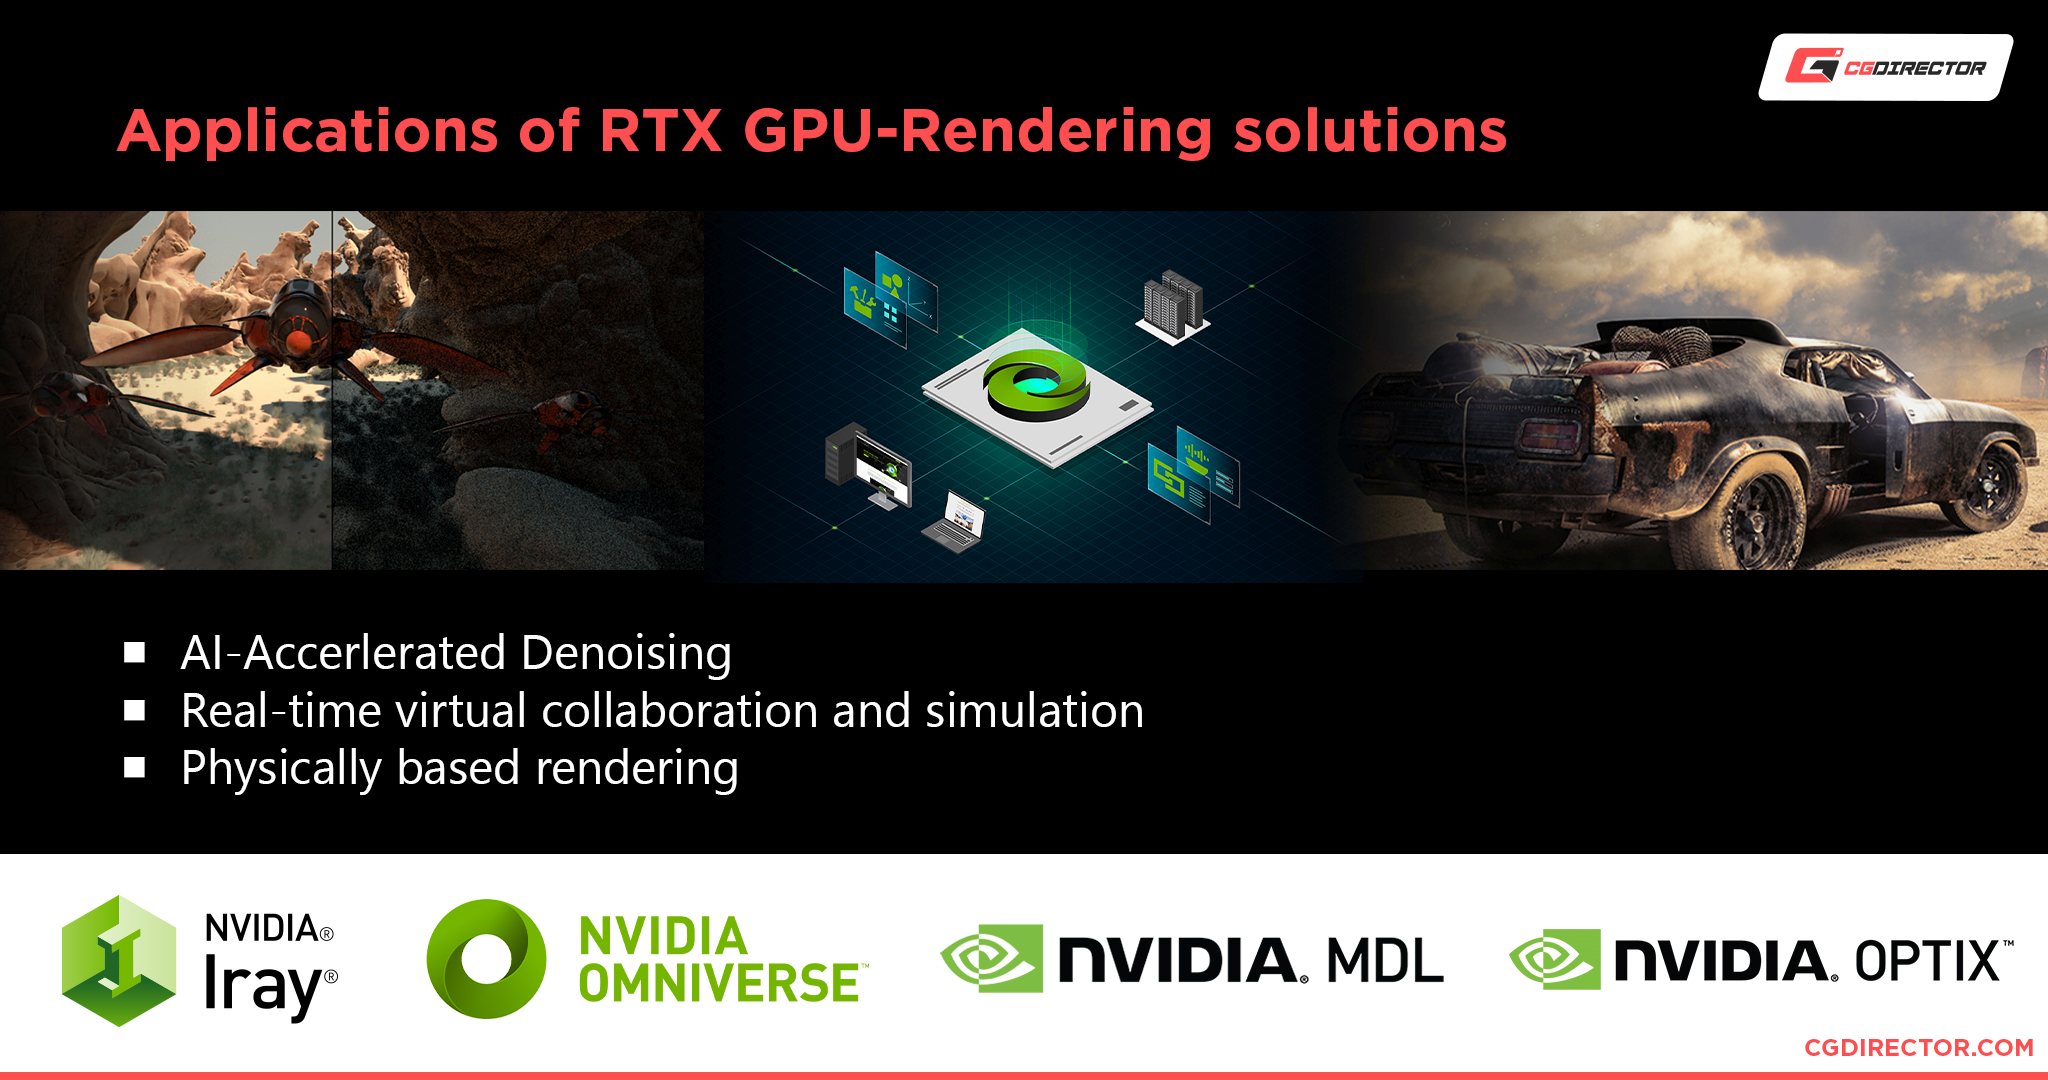 Nvidia-Developed RTX GPU-Rendering Solutions